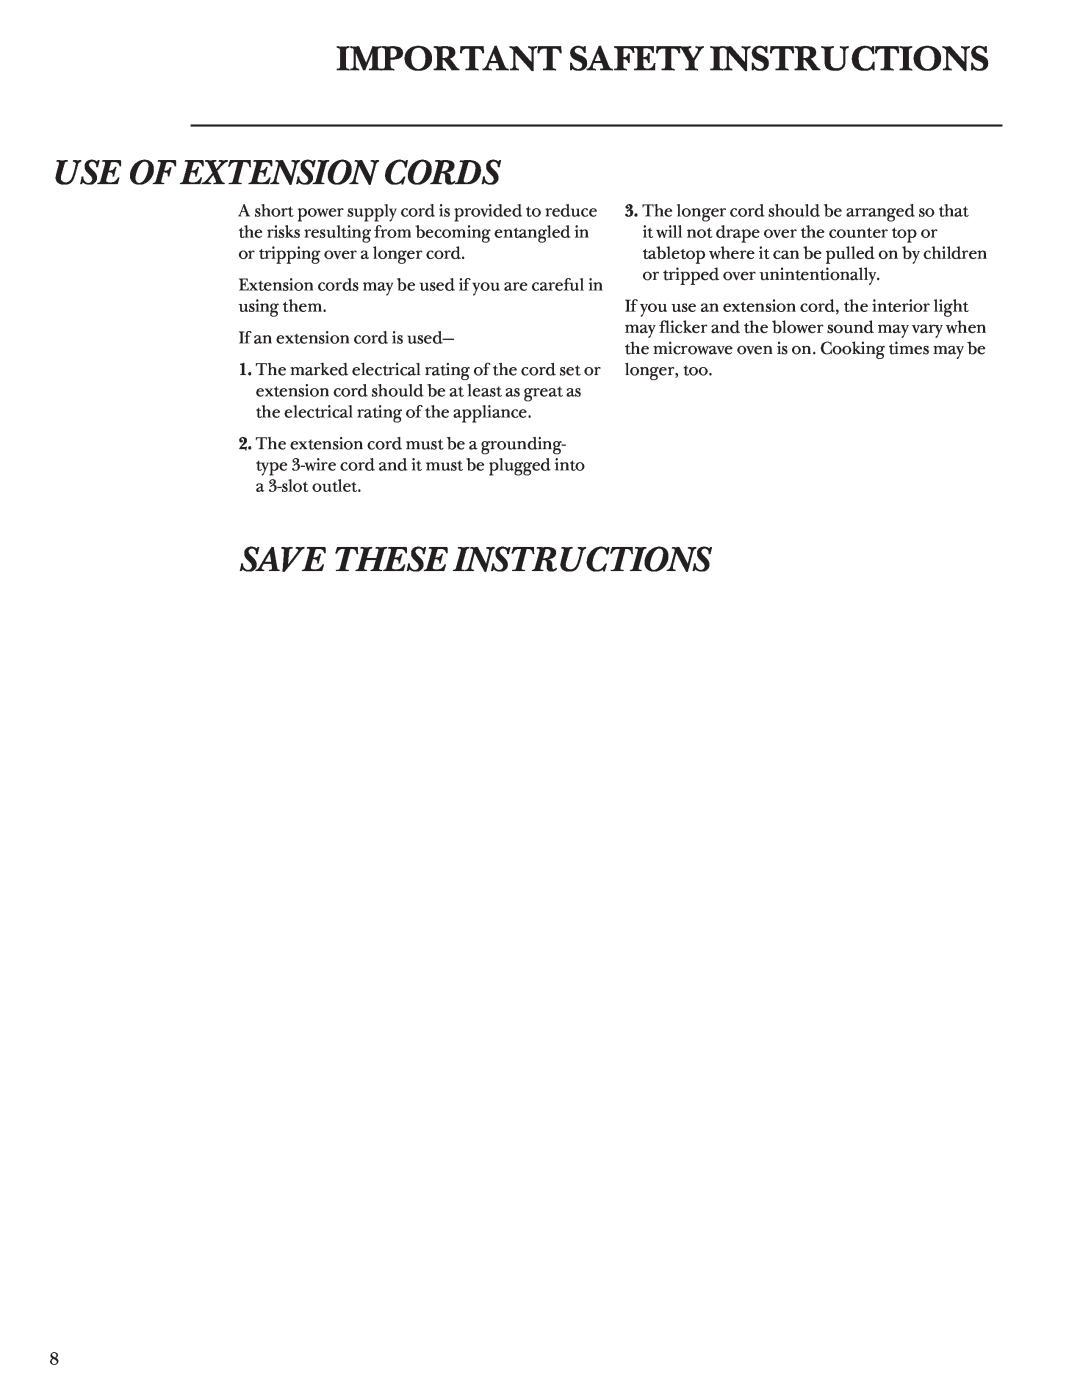 GE ZEM200 manual Use Of Extension Cords, Save These Instructions, Important Safety Instructions 